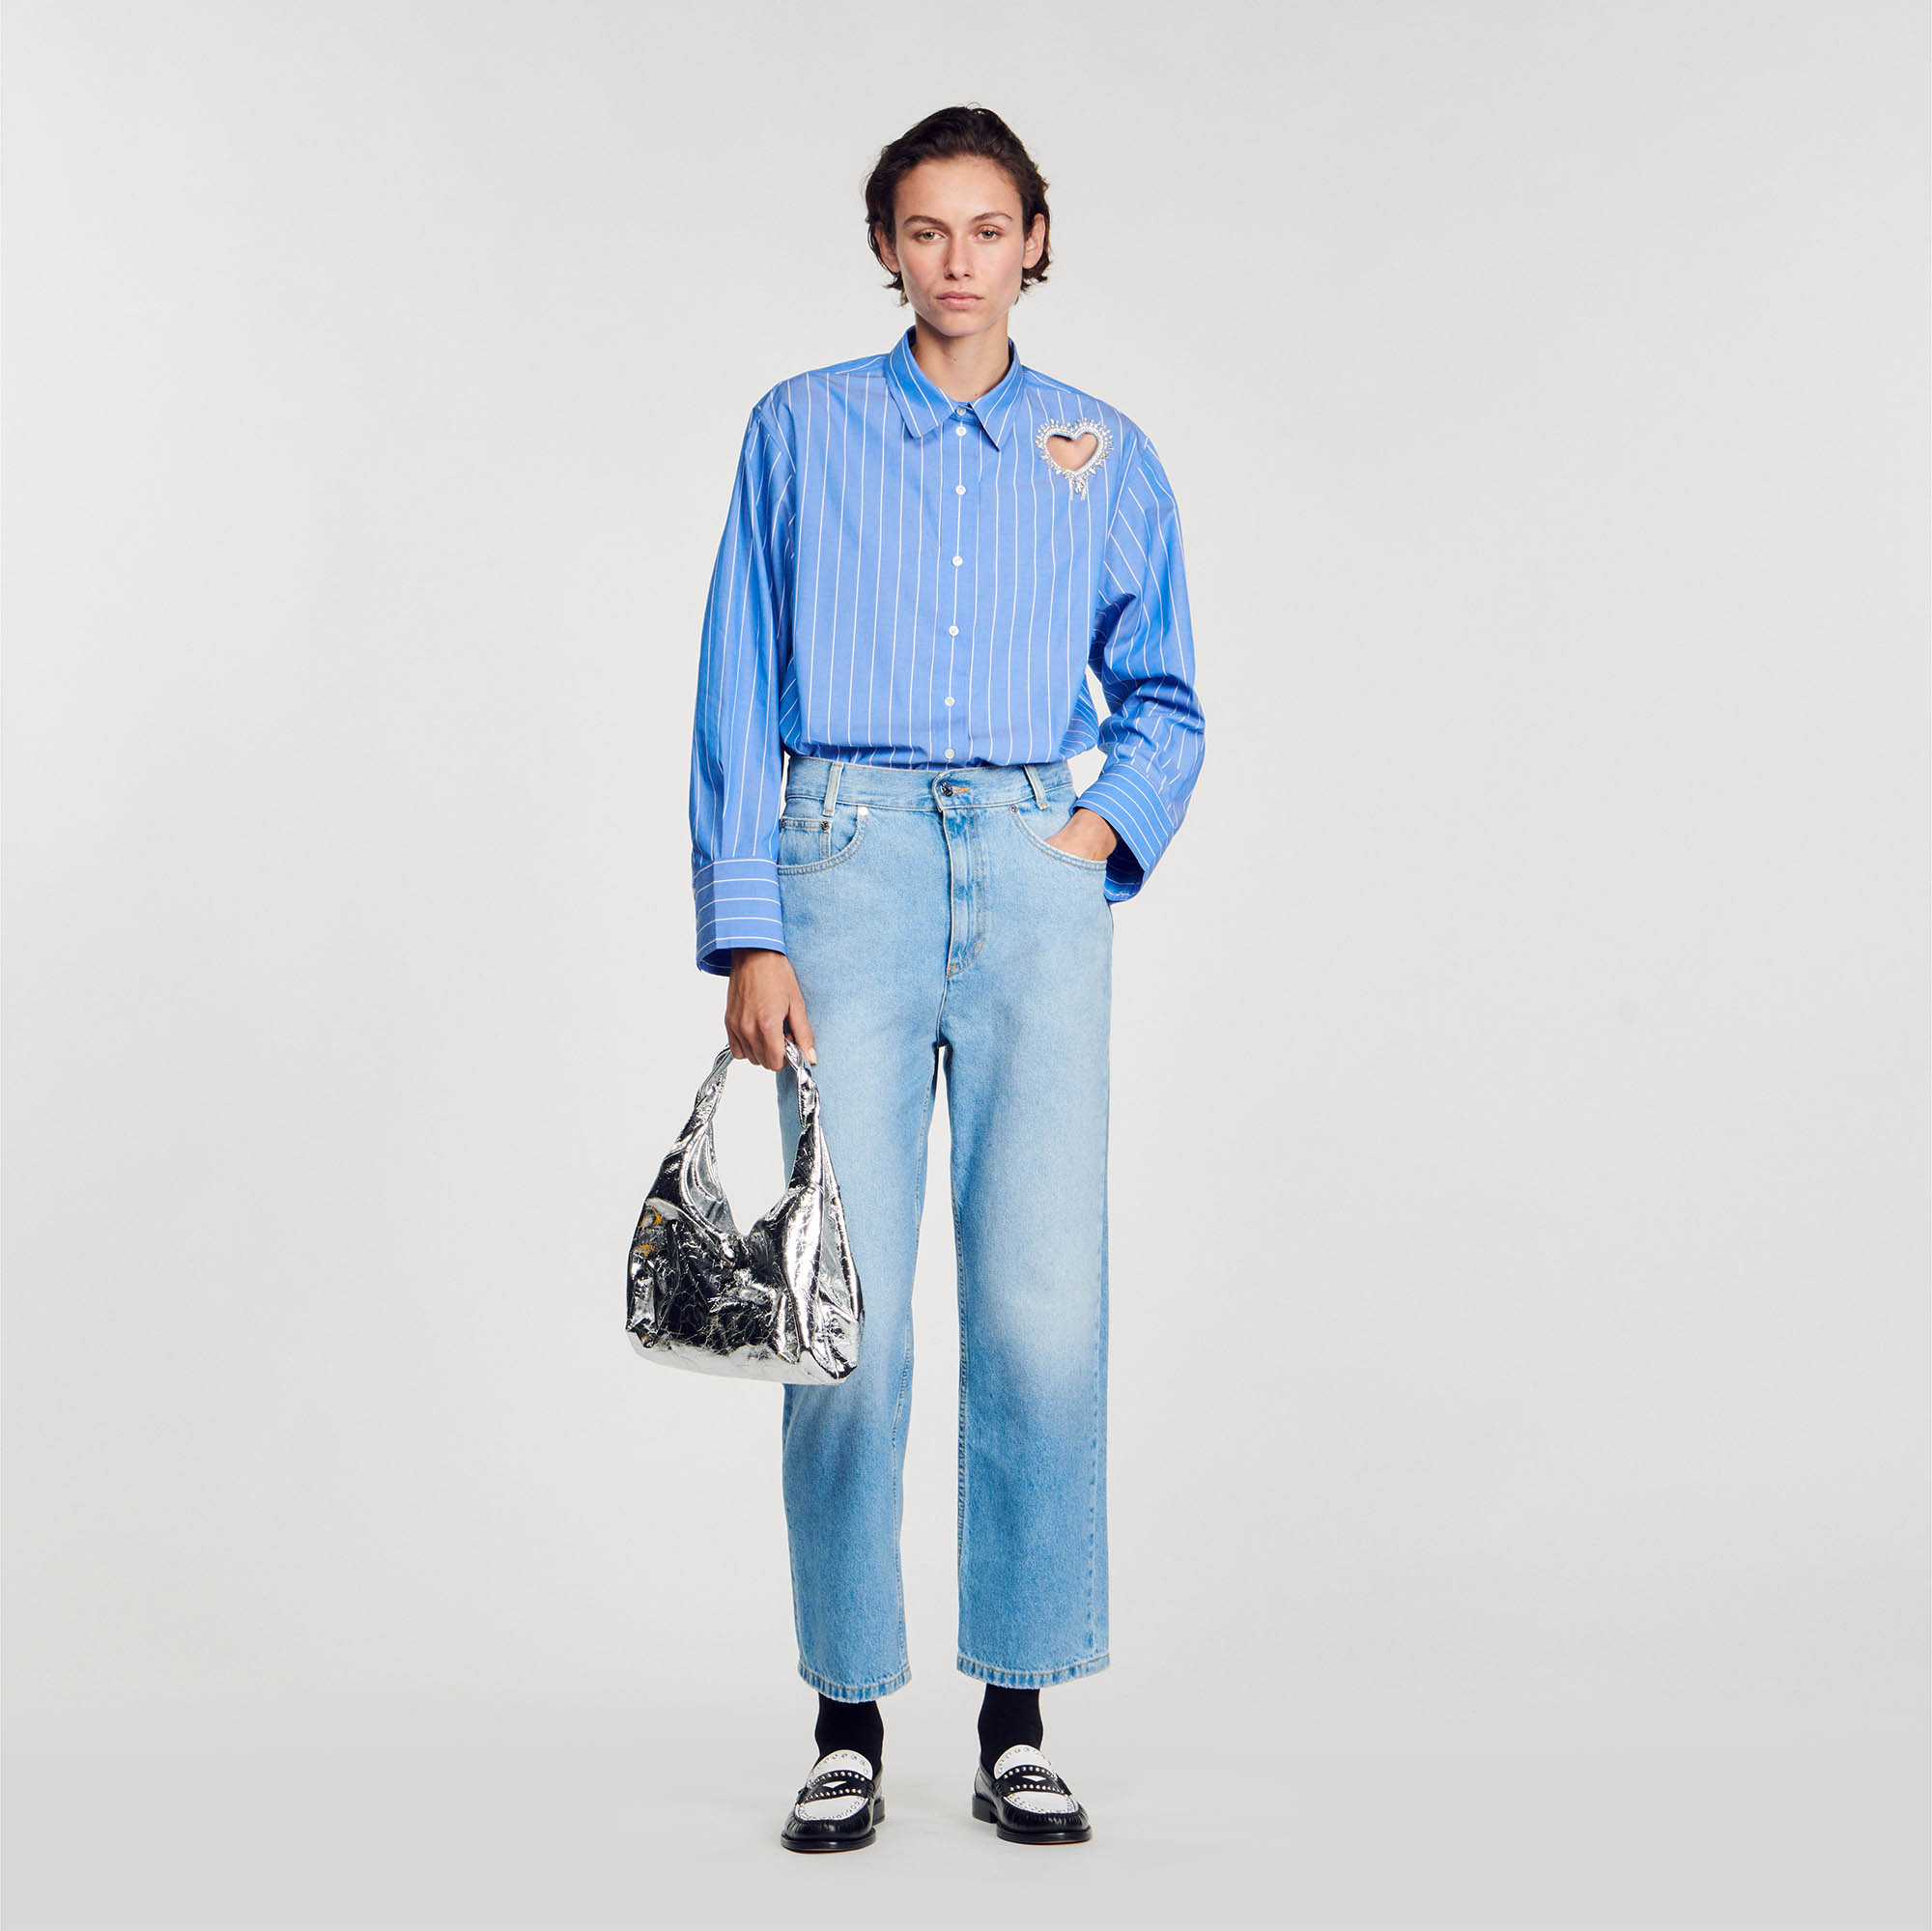 Sandro cotton Oversize striped shirt with shirt collar, long sleeves with buttoned cuffs and a button fastening, embellished with an openwork rhinestone heart on the front